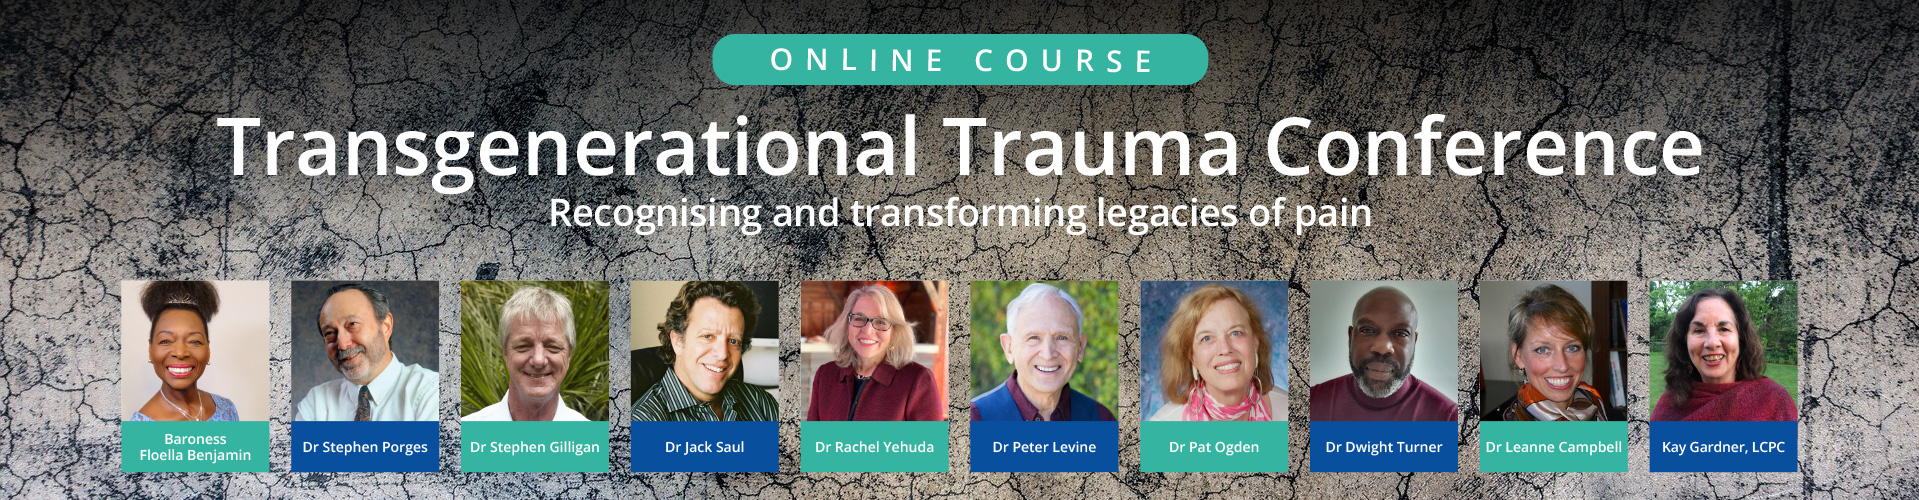 Transgenerational Trauma Conference: Recognising and transforming legacies of pain